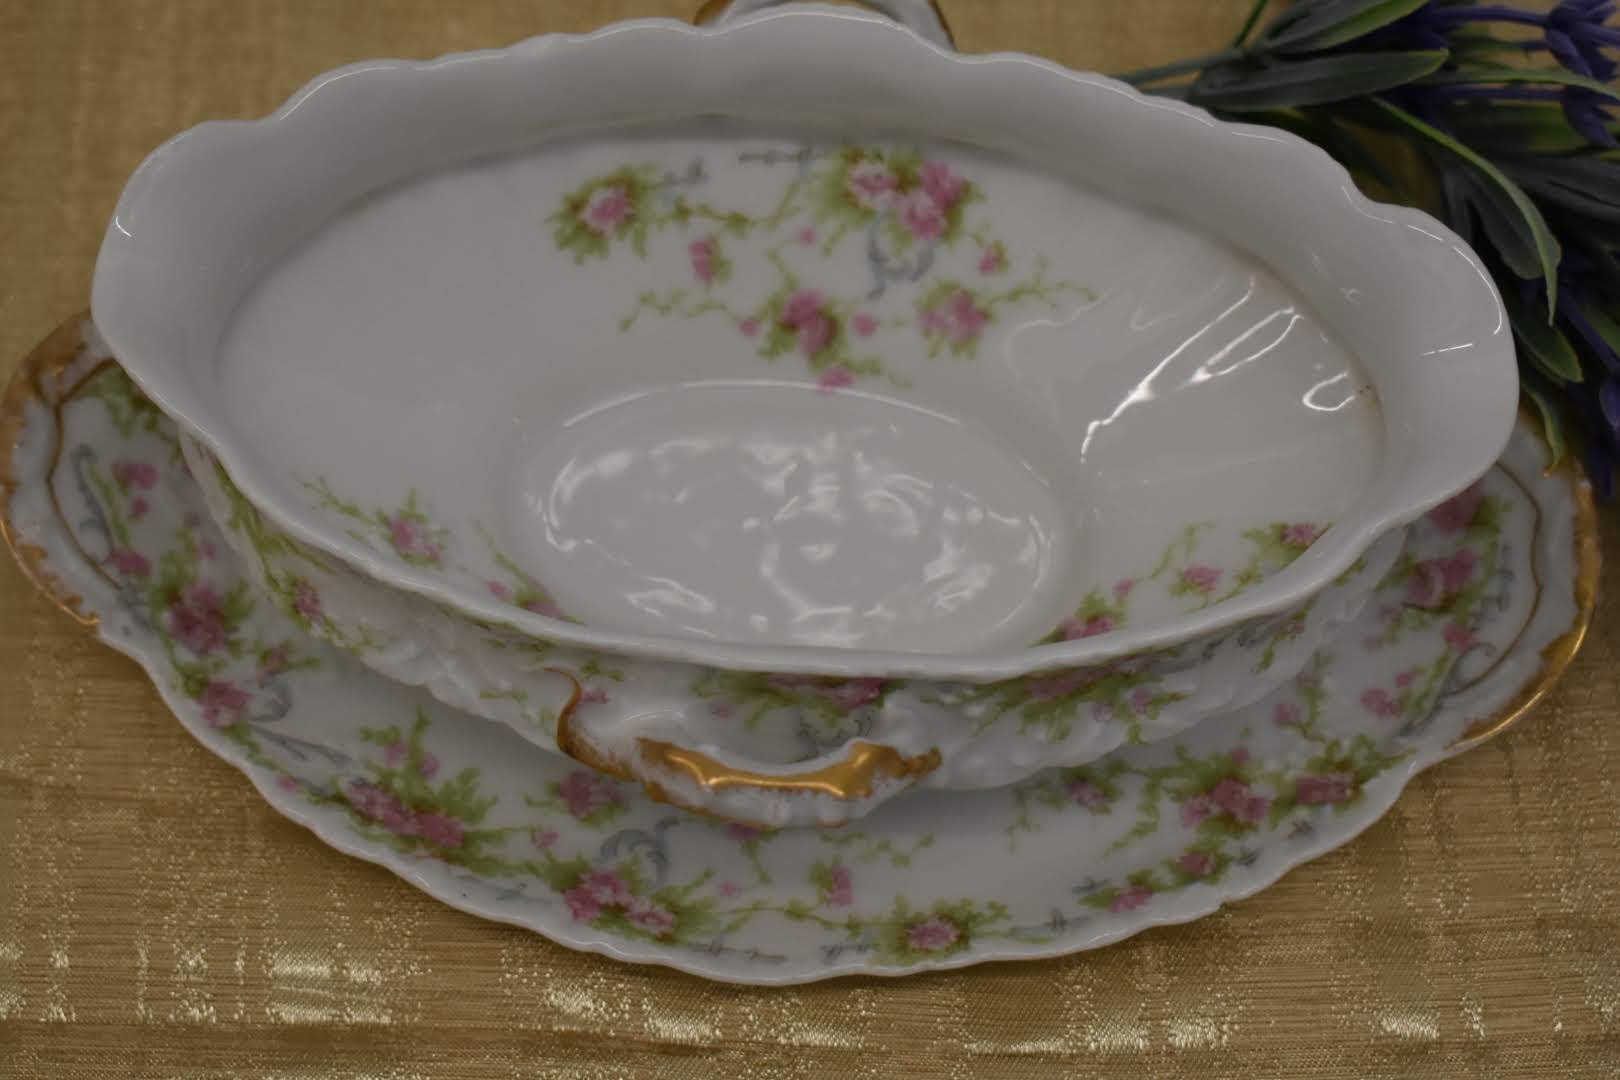 Limoges Theodore Haviland - Fine Porcelain China - Gravy Bowl And Plate- Pink Green Floral Pattern - From France - Gold Trim